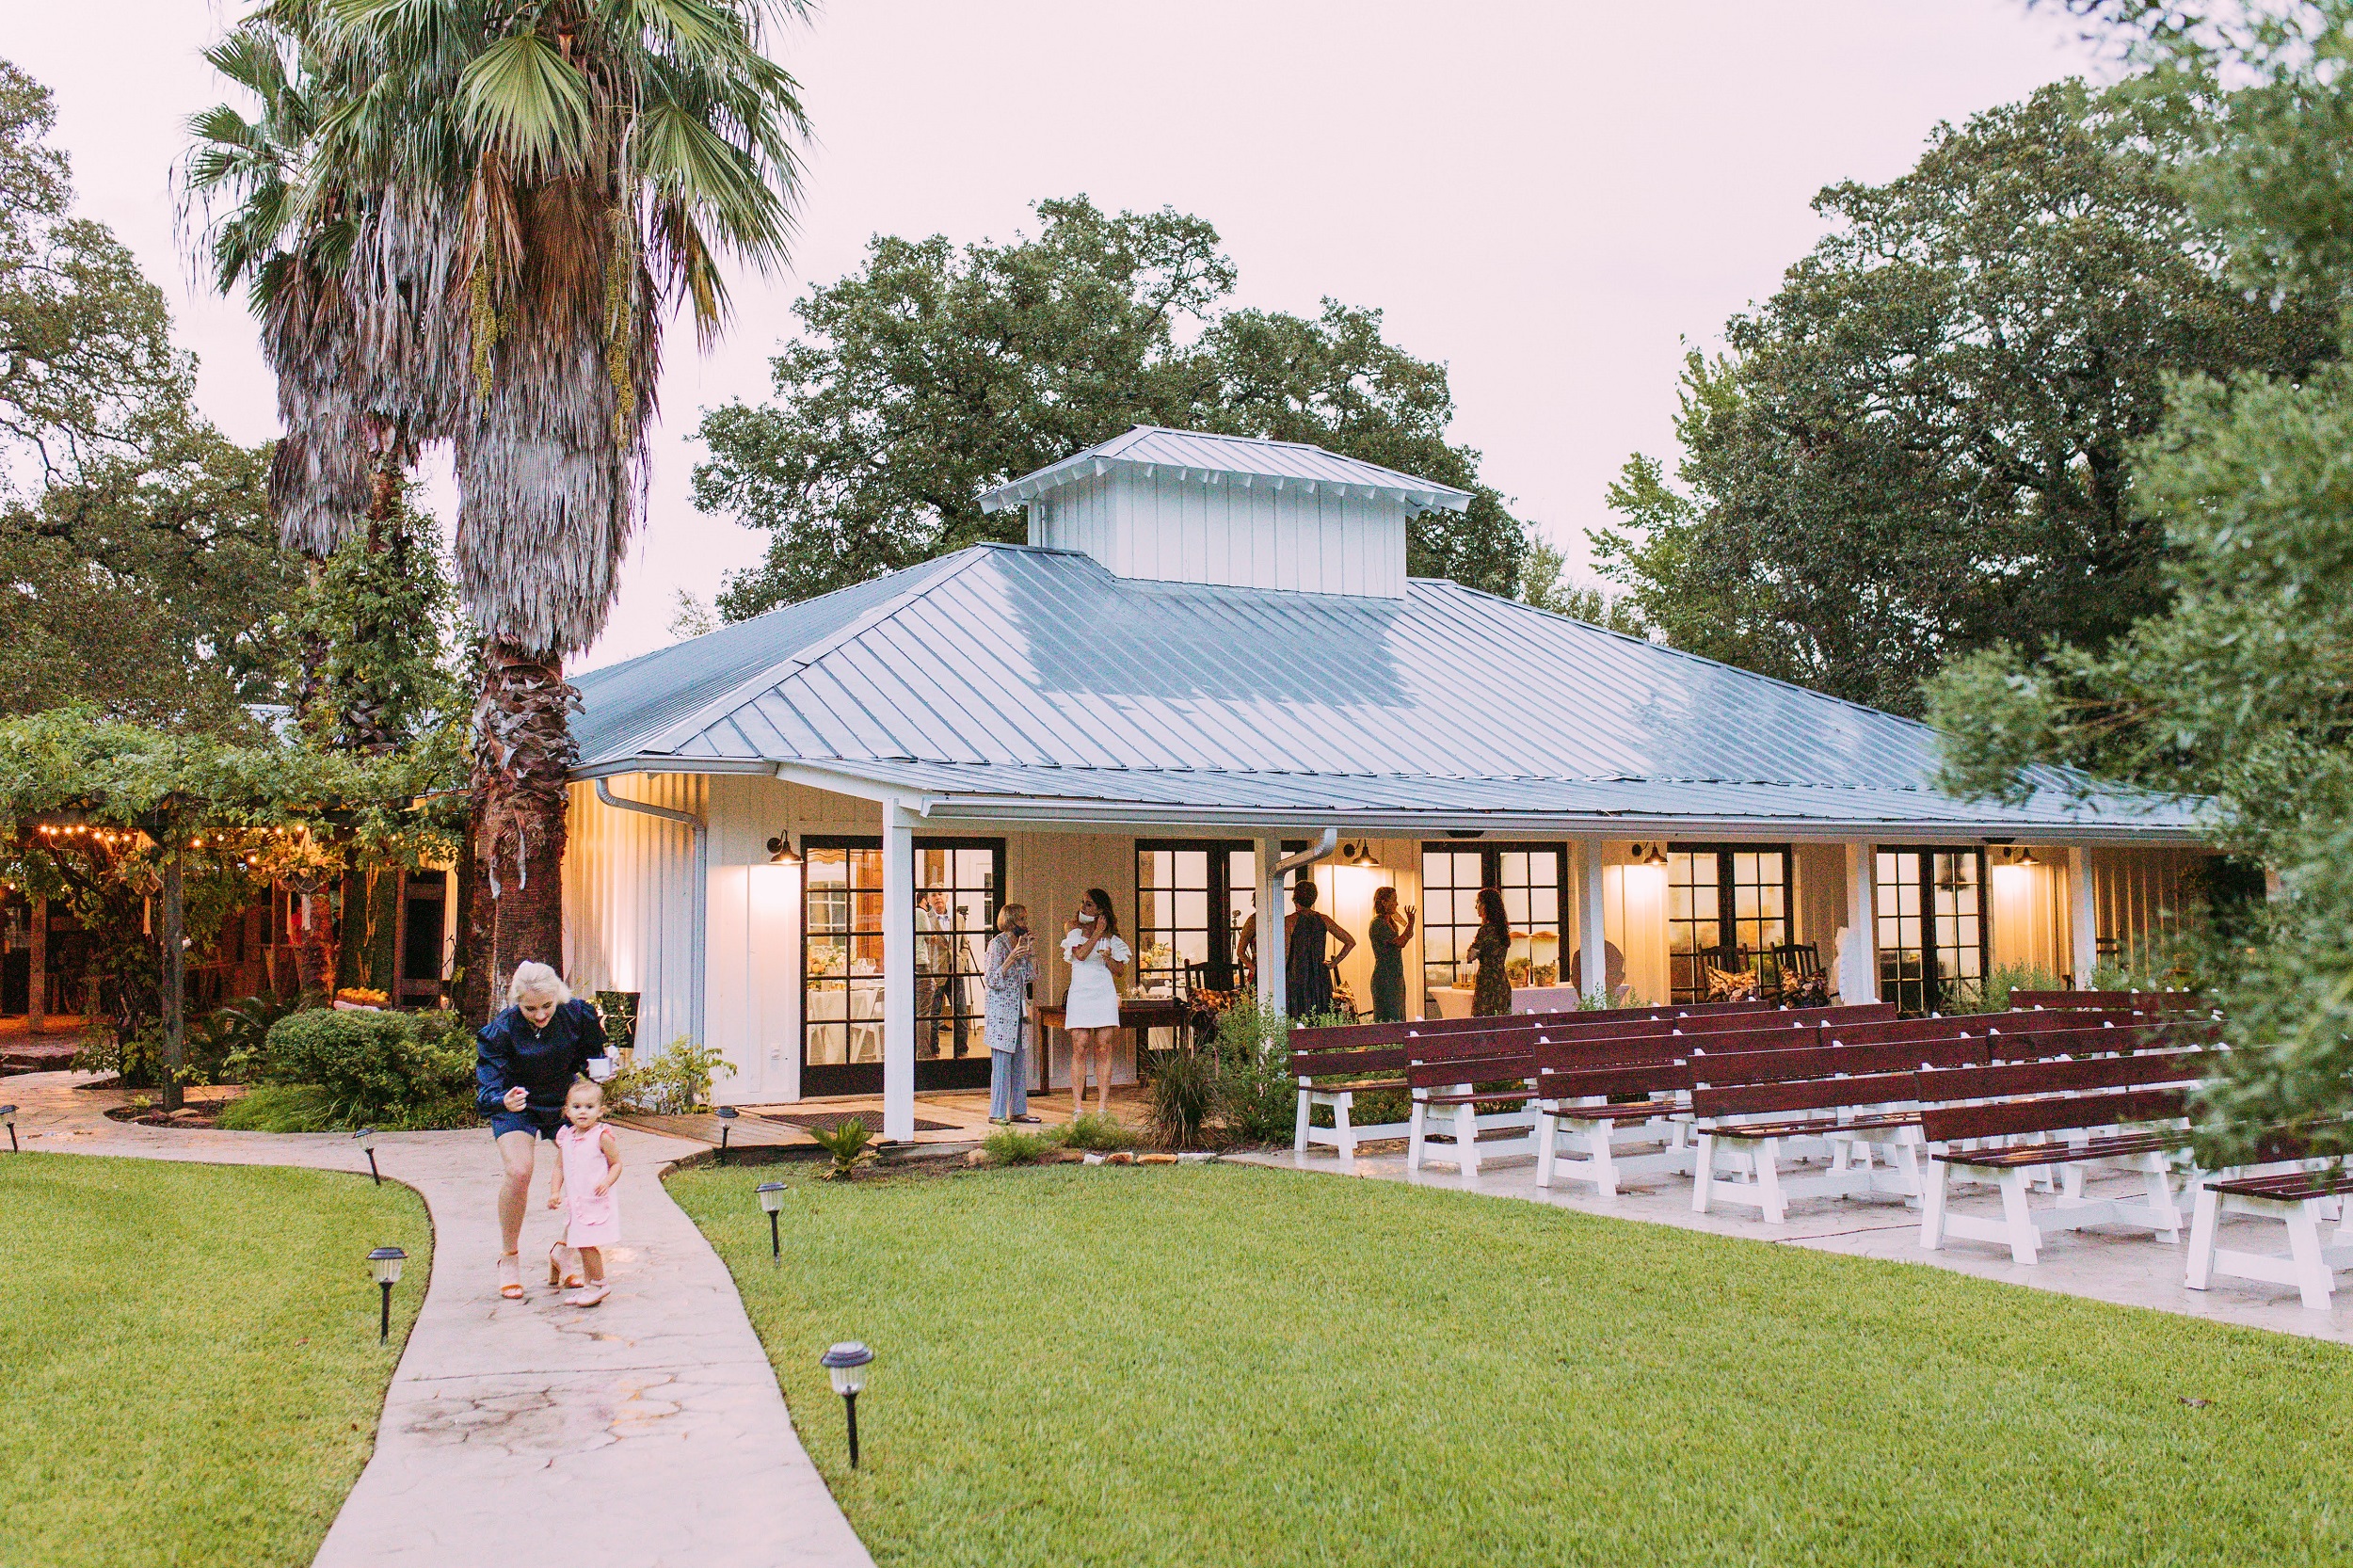 View of Covered Pavilion at dusk with light evenly lighting up accents of 7F Lodge's banquet room - Wedding Venue in Houston